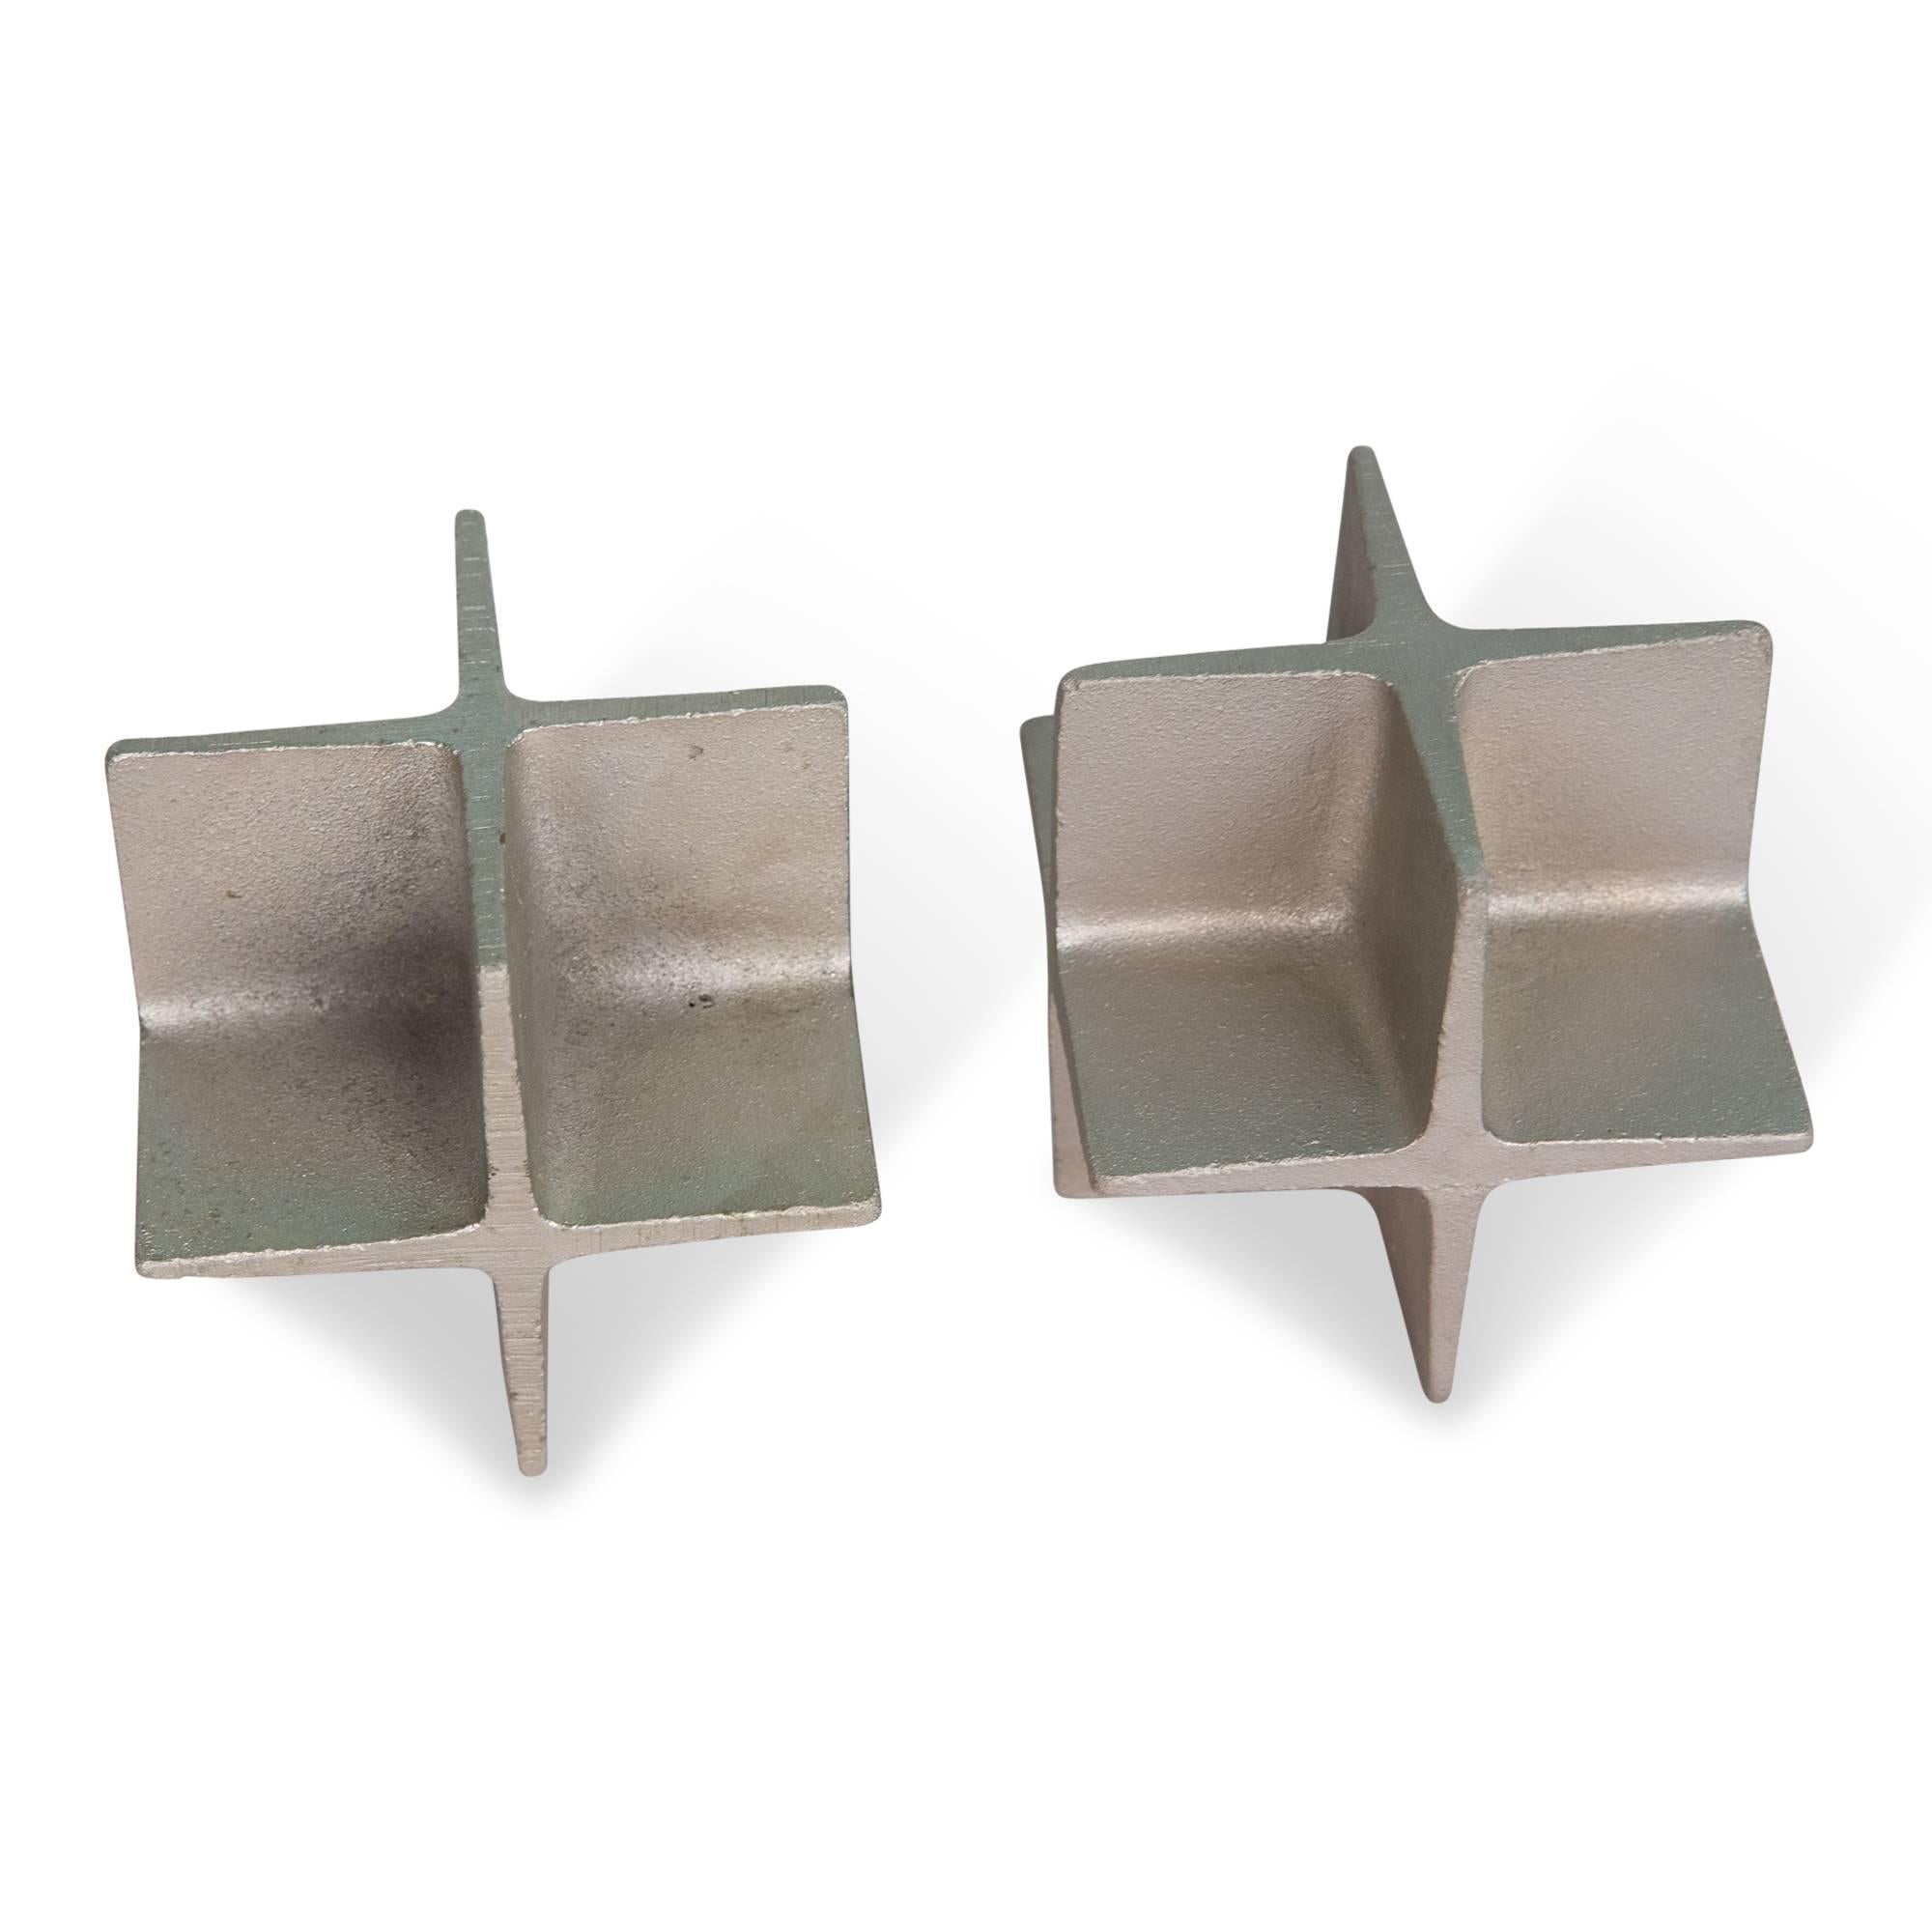 Pair of cast steel cubic bookends or desk paperweights, with protruding cross shapes on every side, by Carl Auböck, Austria, early 1960s. Cubic dimensions 4 in. (sats)